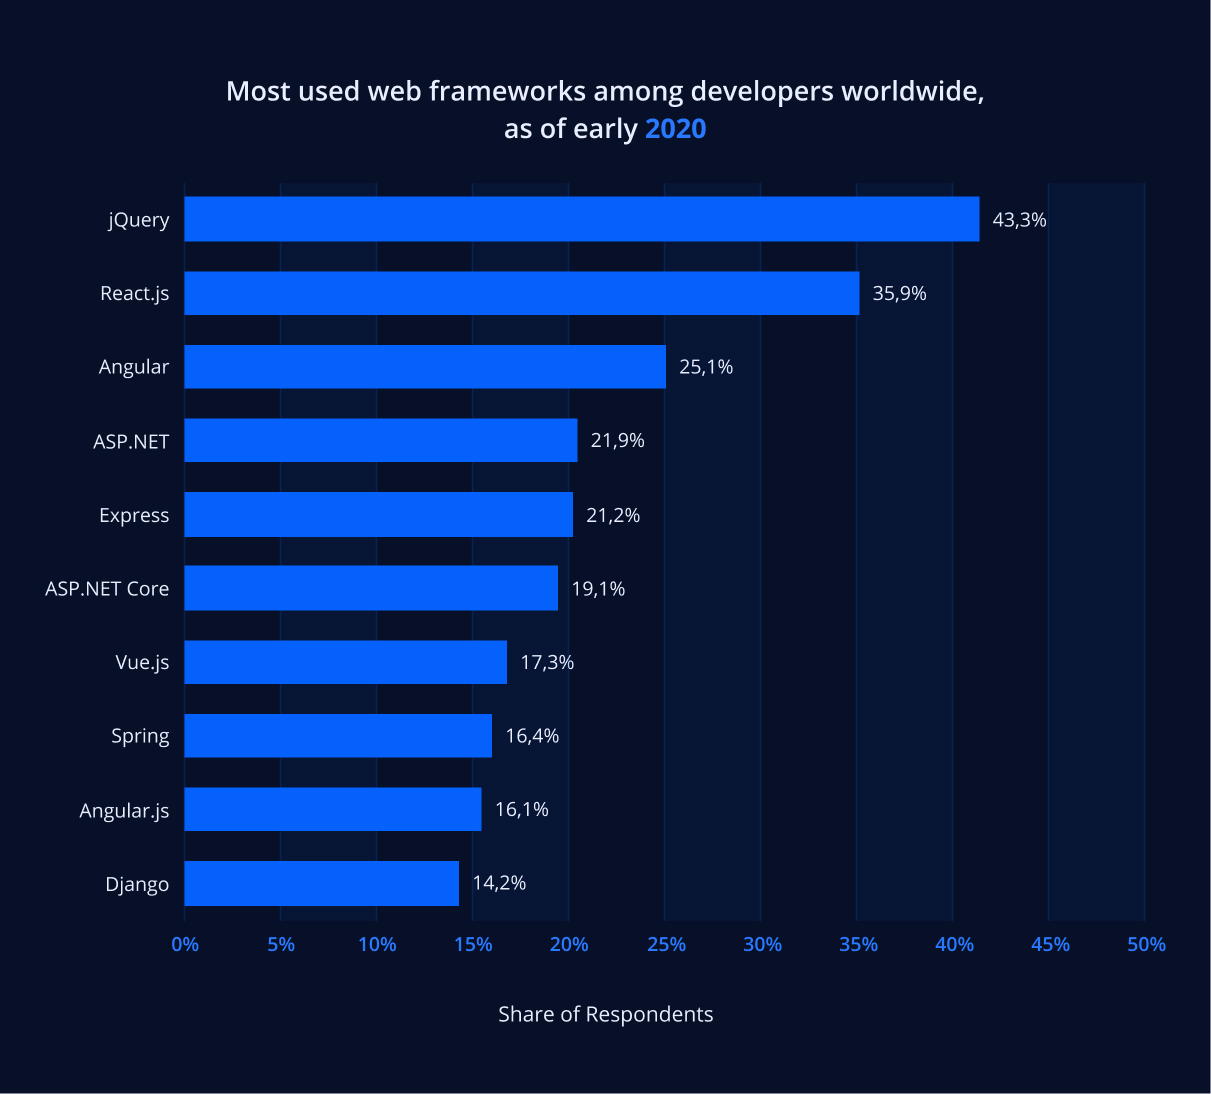 Most used web frameworks in 2020